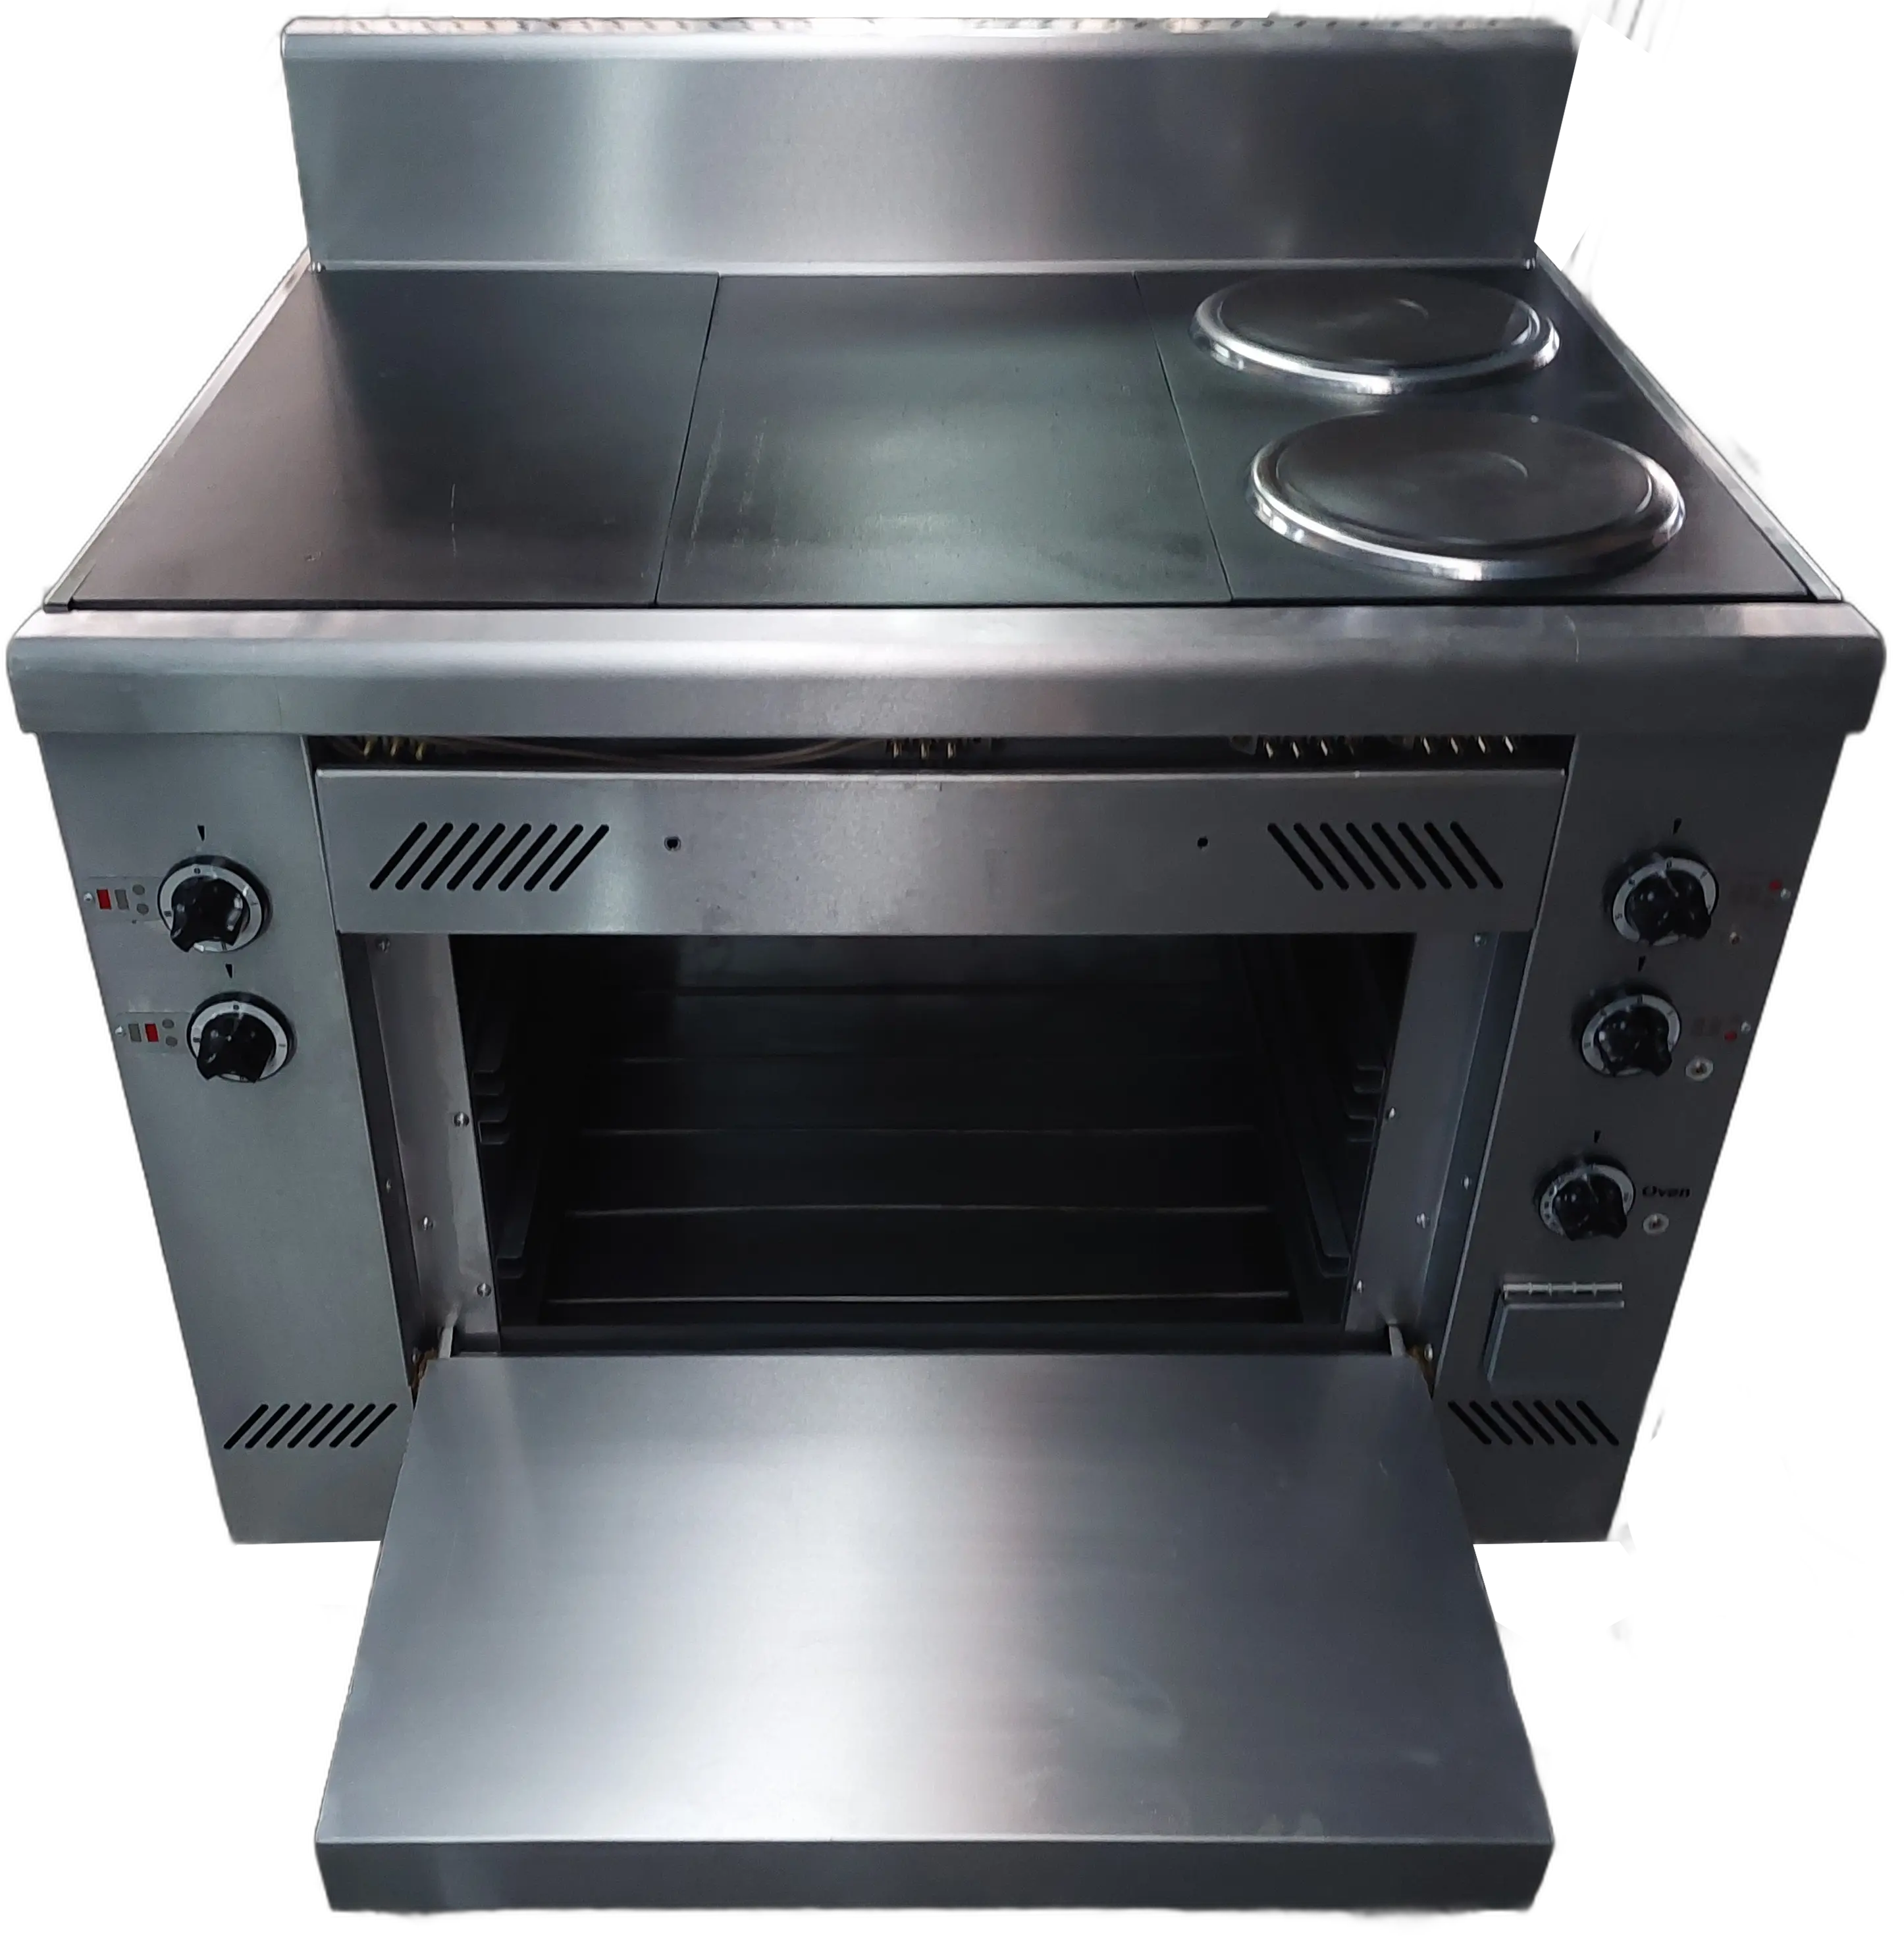 Two and two plate electricity stove with oven